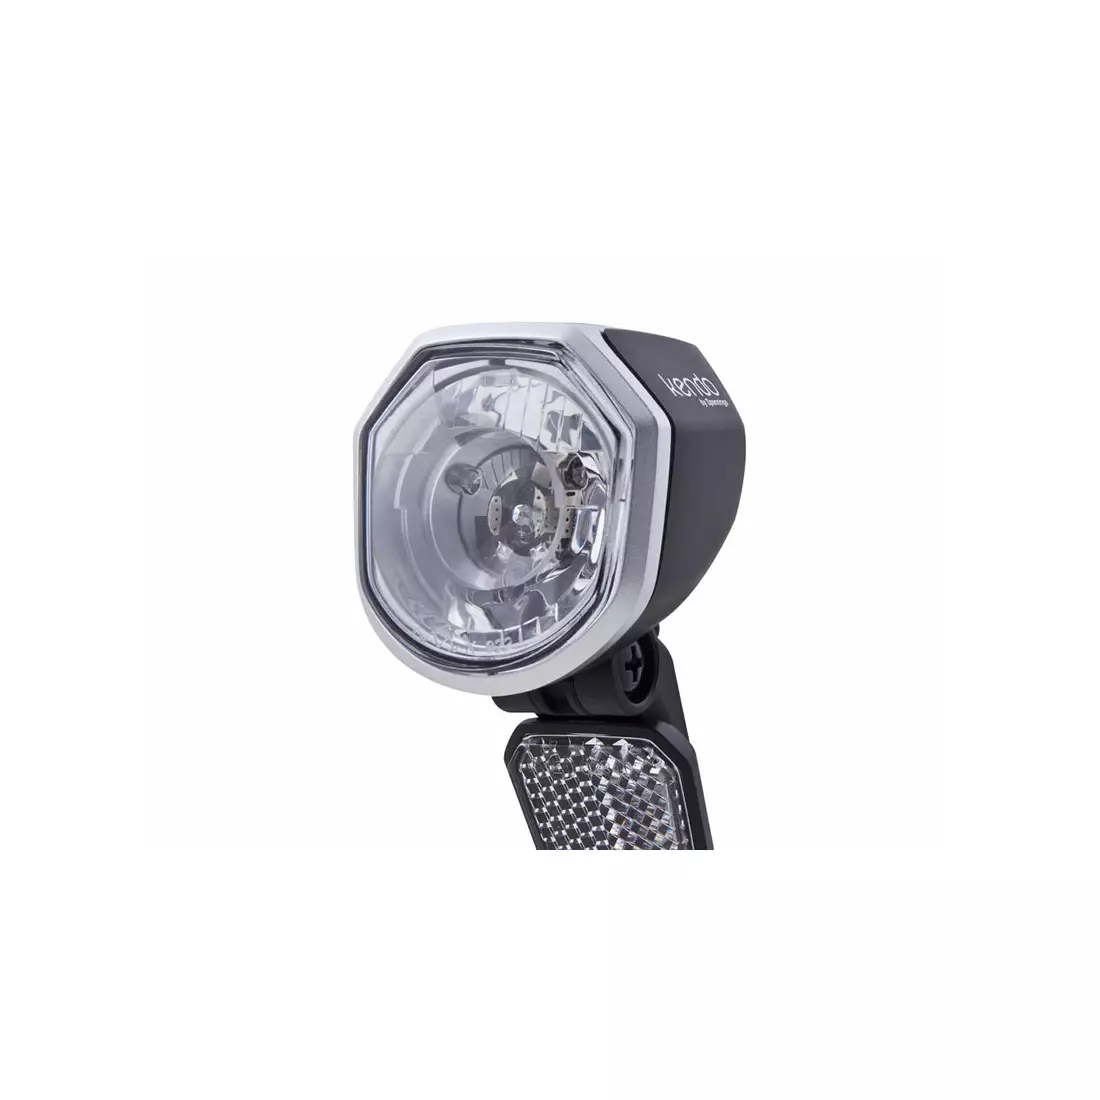 Bicycle front light SPANNINGA KENDO+ XE 30 lux/120 lumens fore-bike 6-36VDC (NEW) SNG-H057088